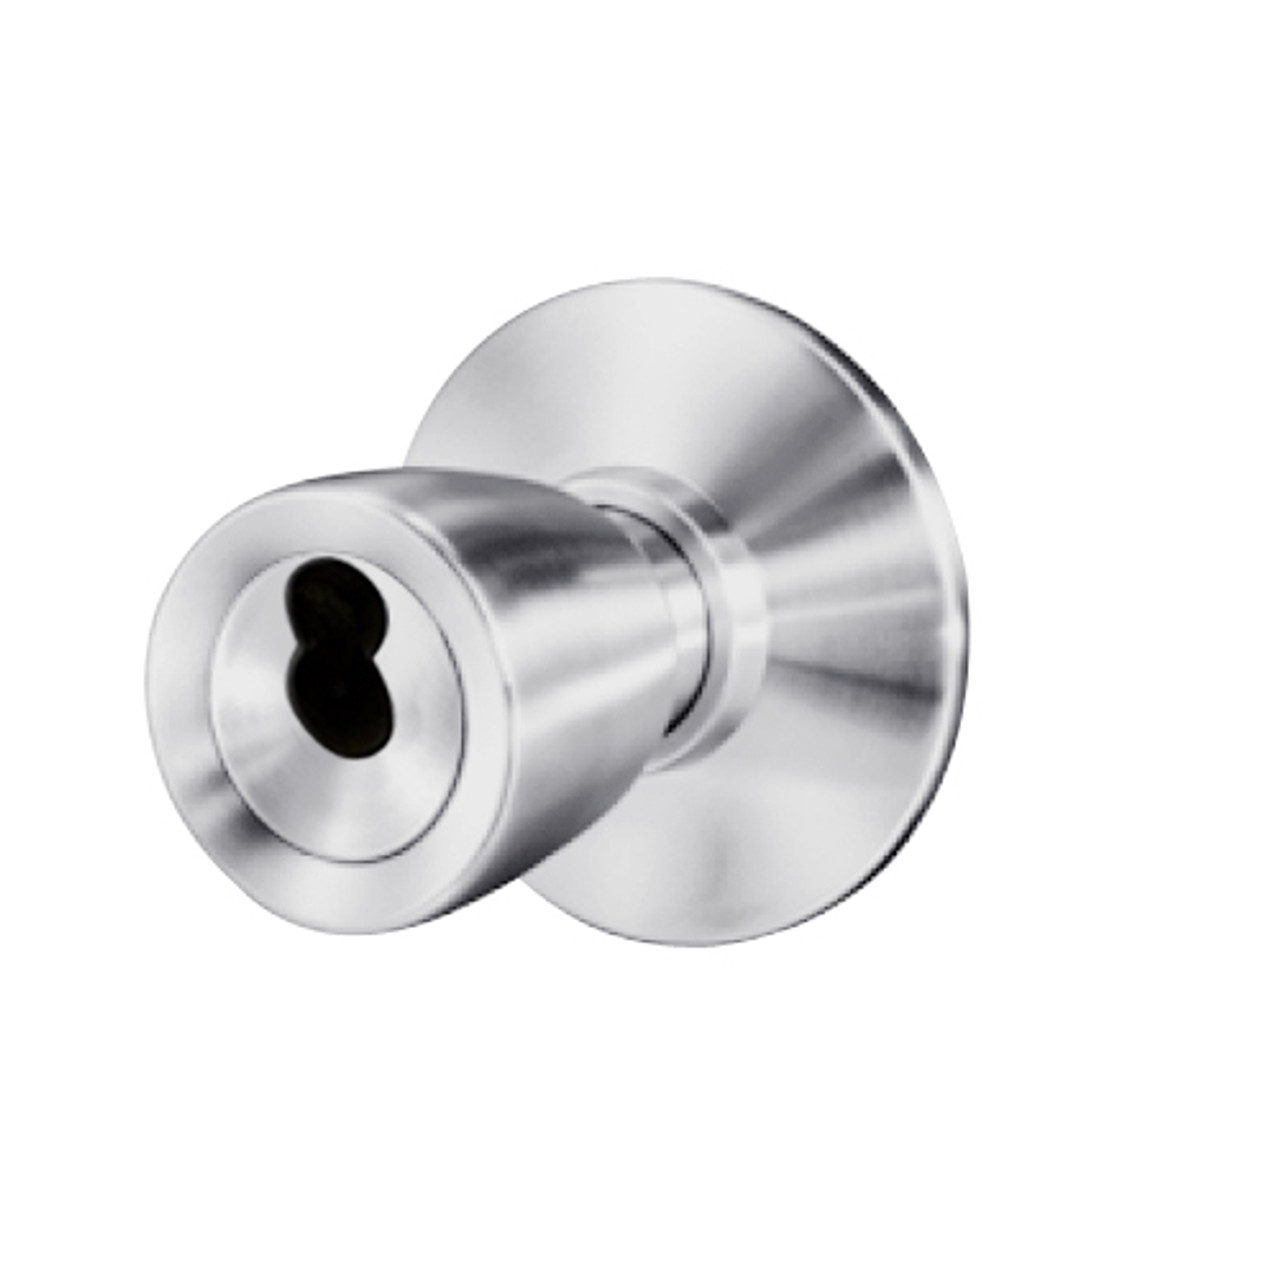 8K47YD6DS3626 Best 8K Series Exit Heavy Duty Cylindrical Knob Locks with Tulip Style in Satin Chrome